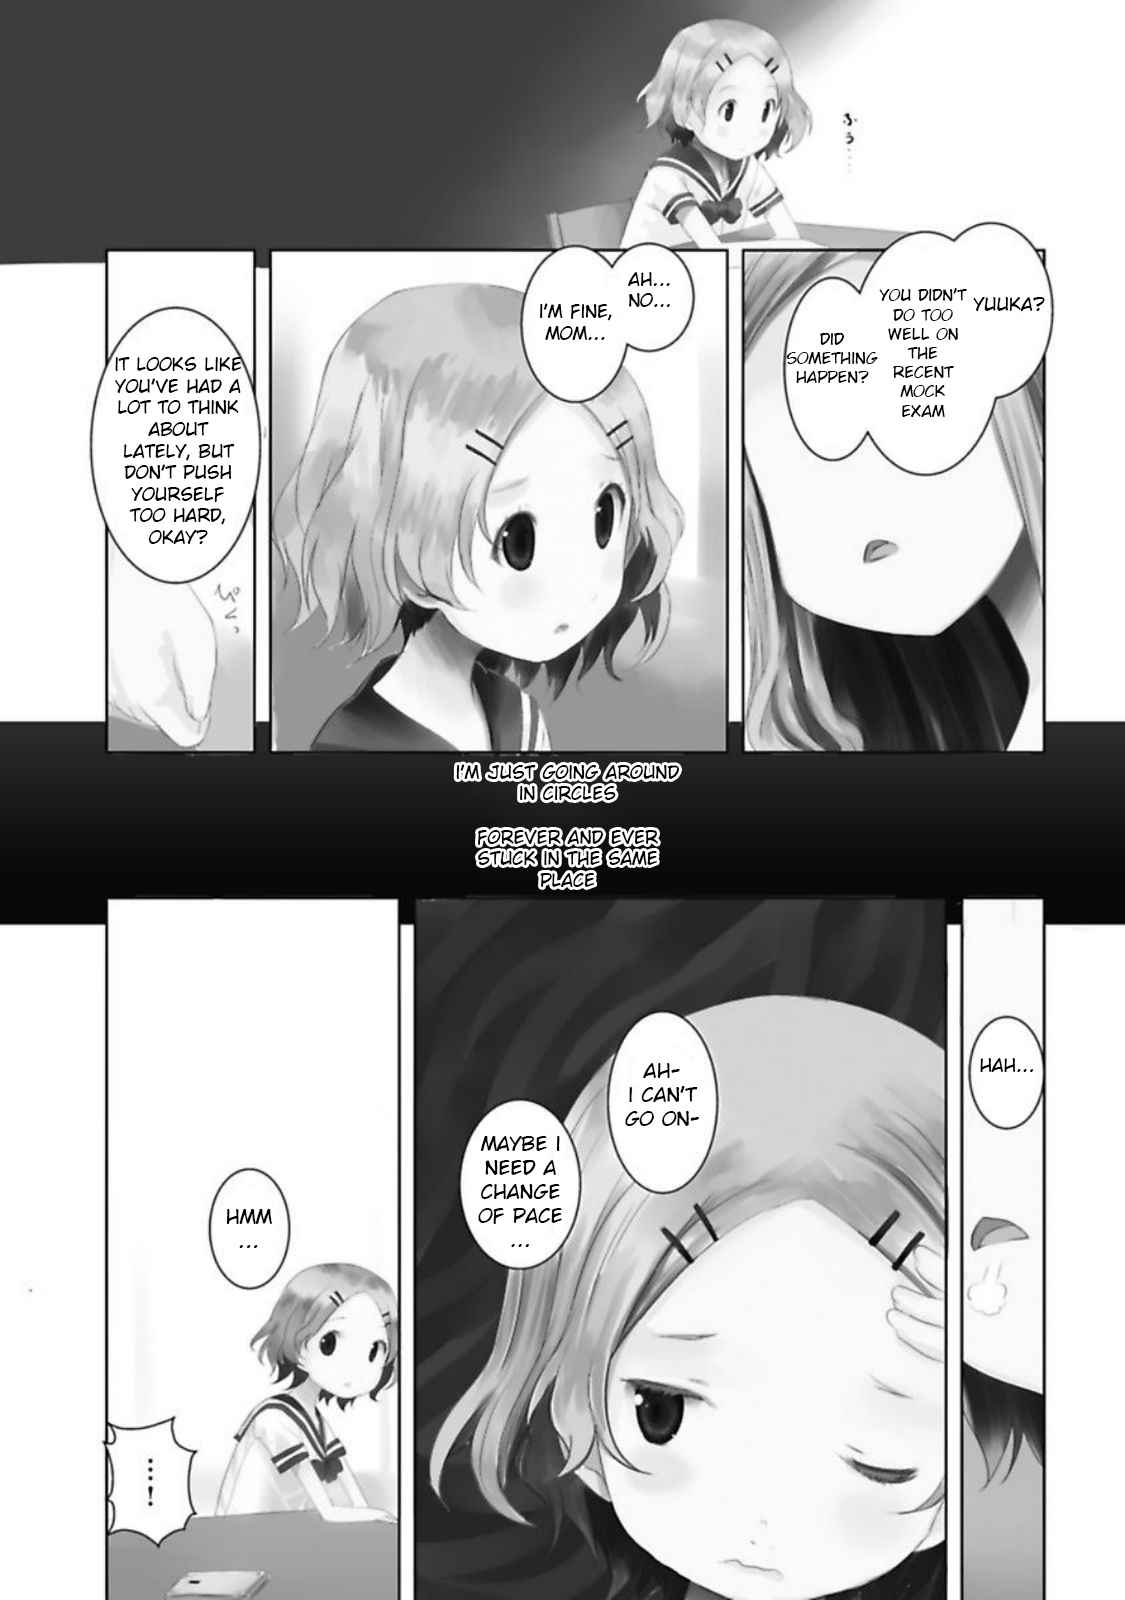 Yama No Susume Vol. 5 Ch. 33 I Can't Use My Gym Clothes?